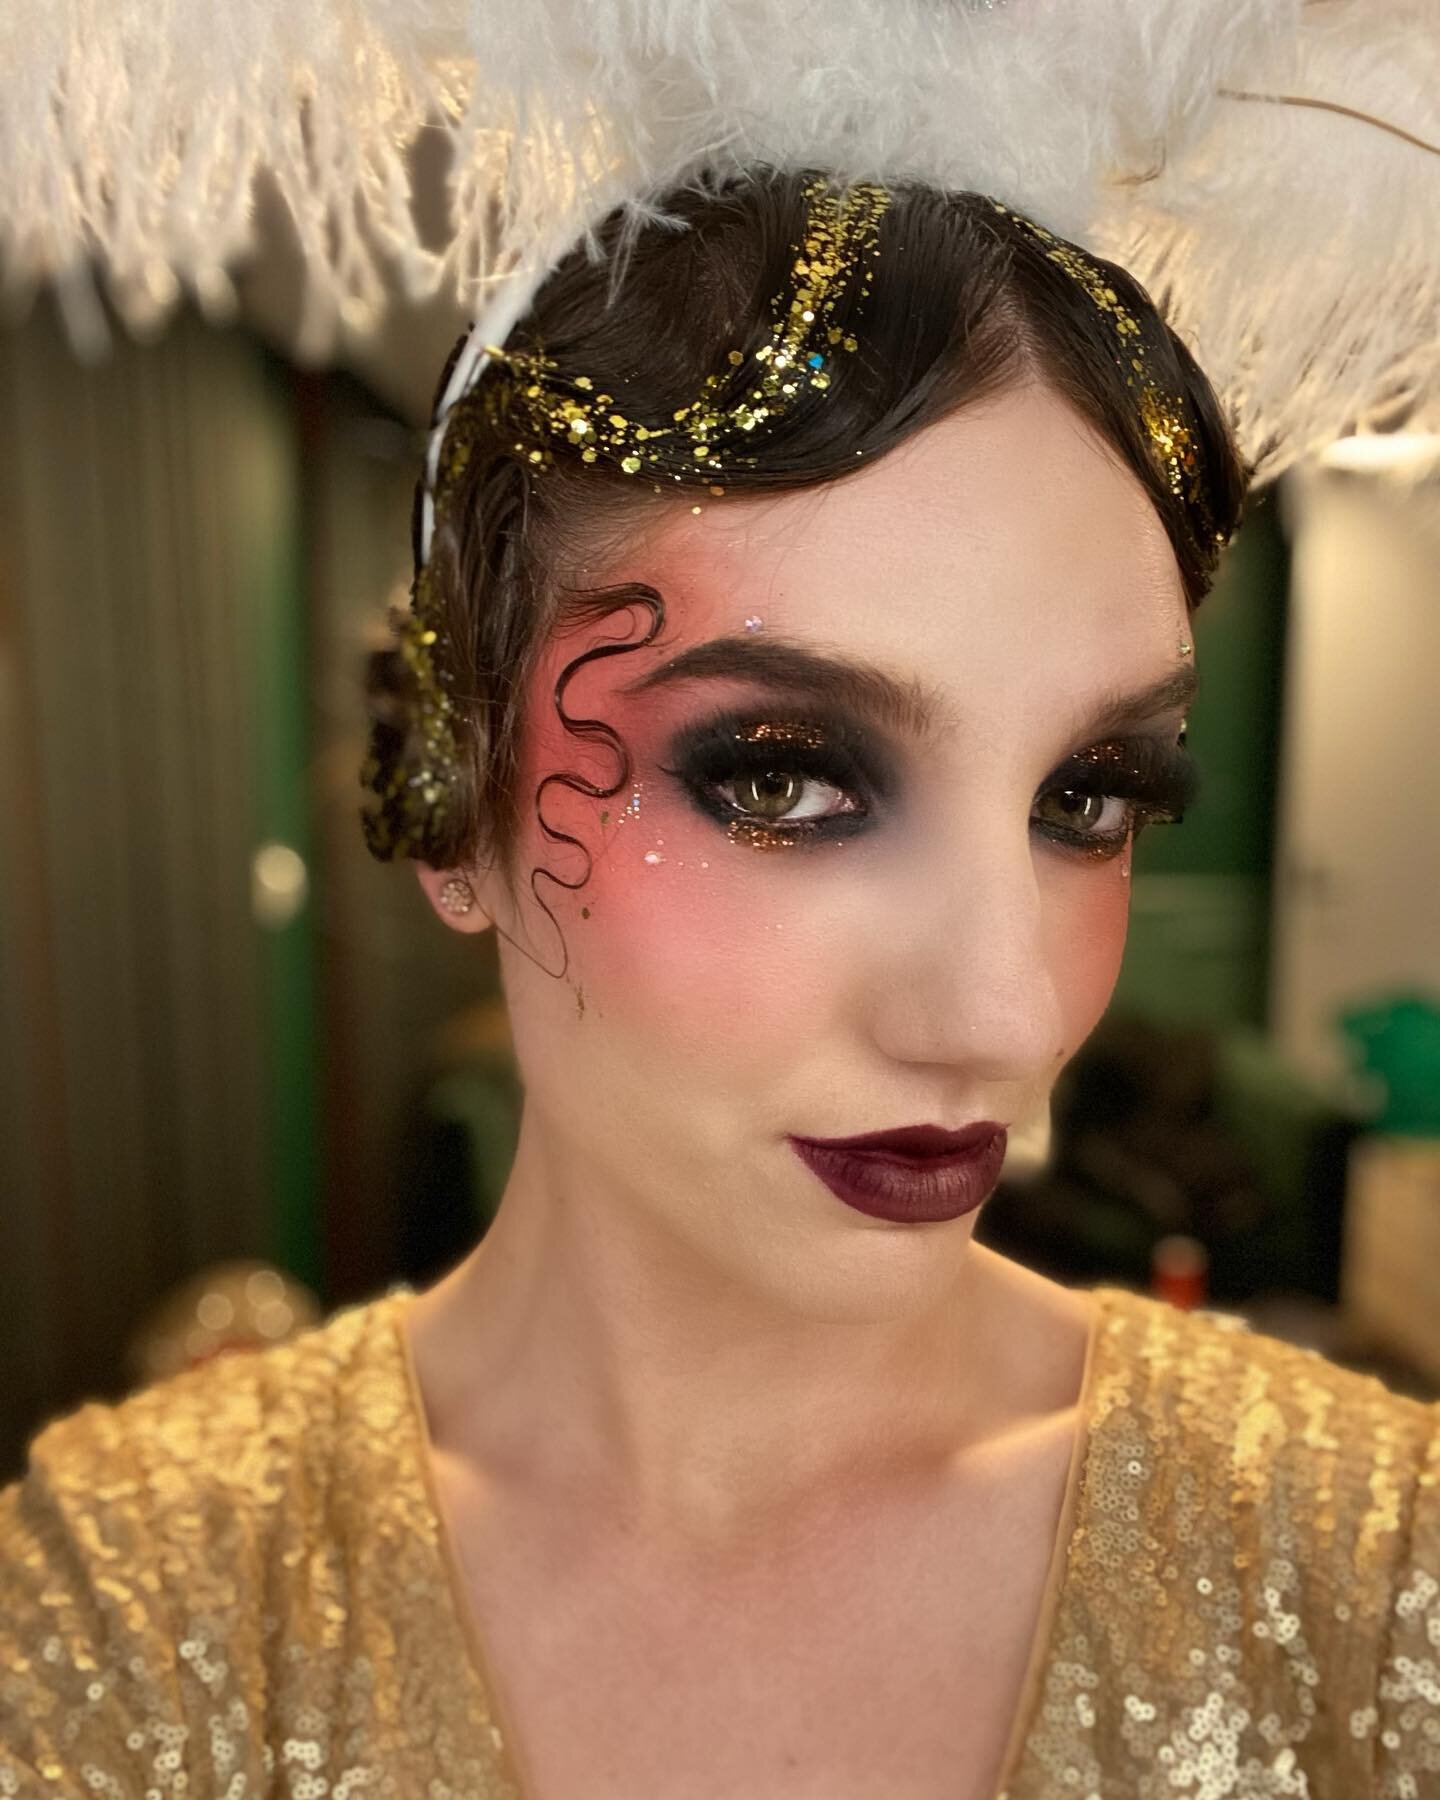 Hair and Makeup on absolute stunners @madrussell and @chloemalek for the @google.australia &lsquo;Magic&rsquo; themed party last night. 
Temple rouge+finger wave+glitter= chefs kiss (and they said I was rubbish at maths 🙄)
Event by &lsquo;Produced B